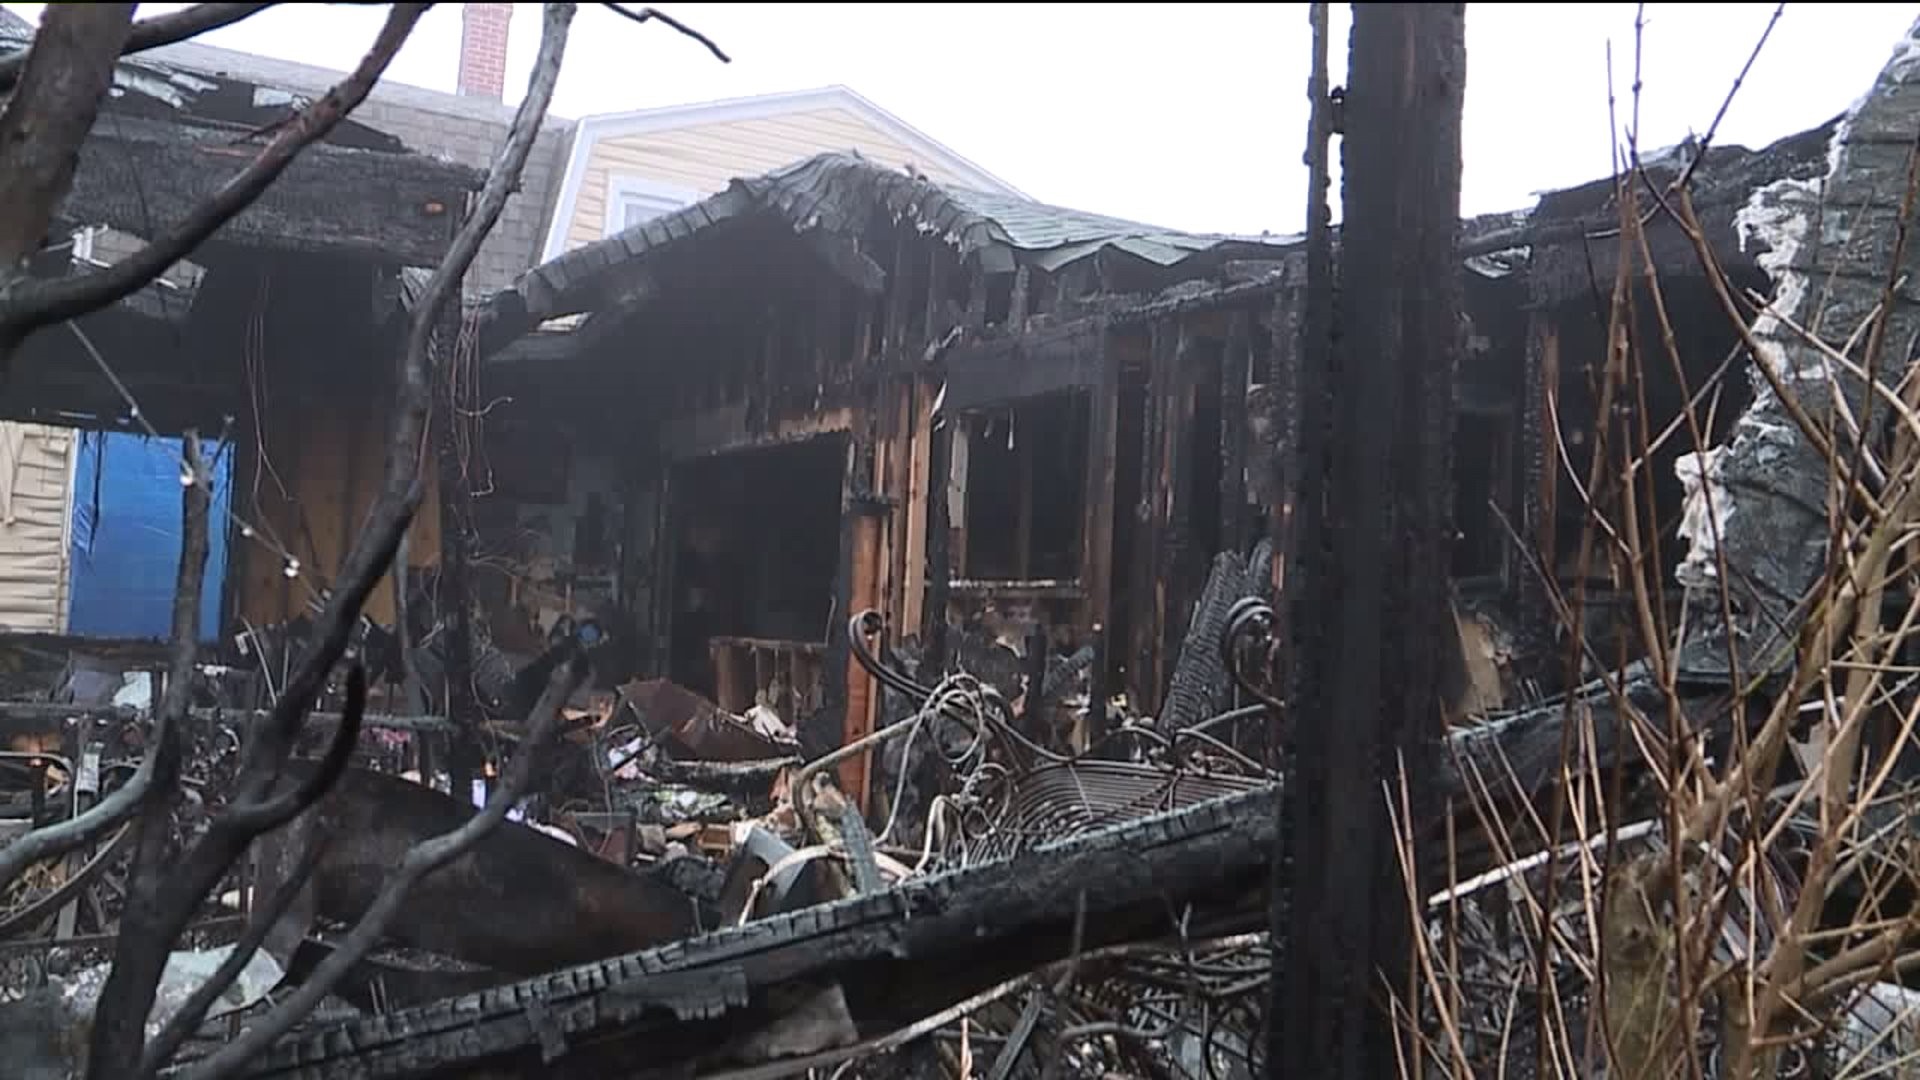 Arson Leaves Mother Displaced, in Need